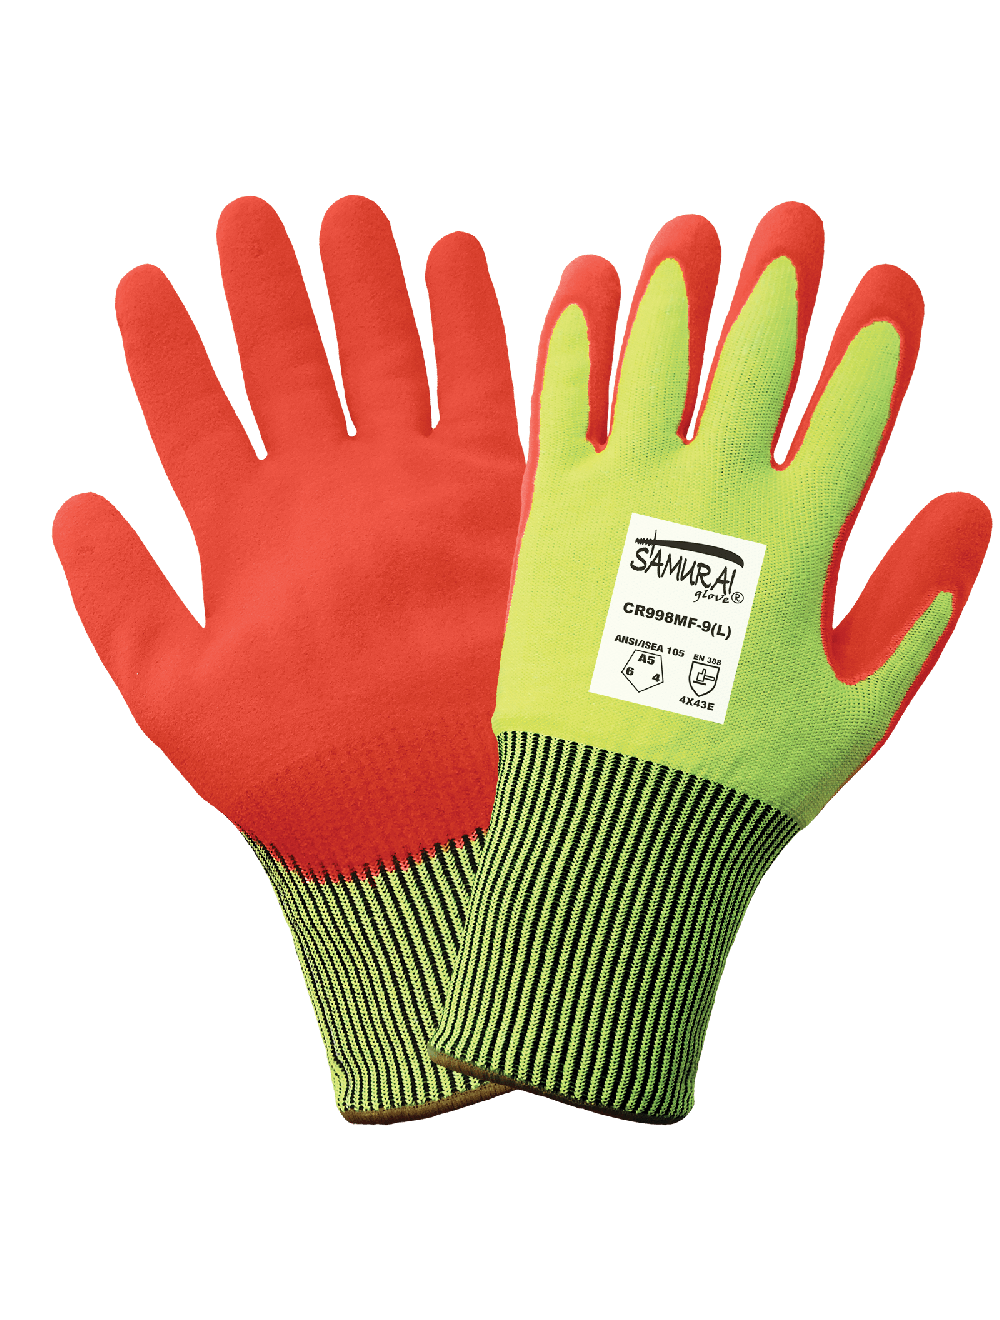 Samurai Glove® High-Visibility Cut, Abrasion, and Puncture Resistant Mach Finish Nitrile Double-Dipped Gloves - LIMITED STOCK - CR998MF